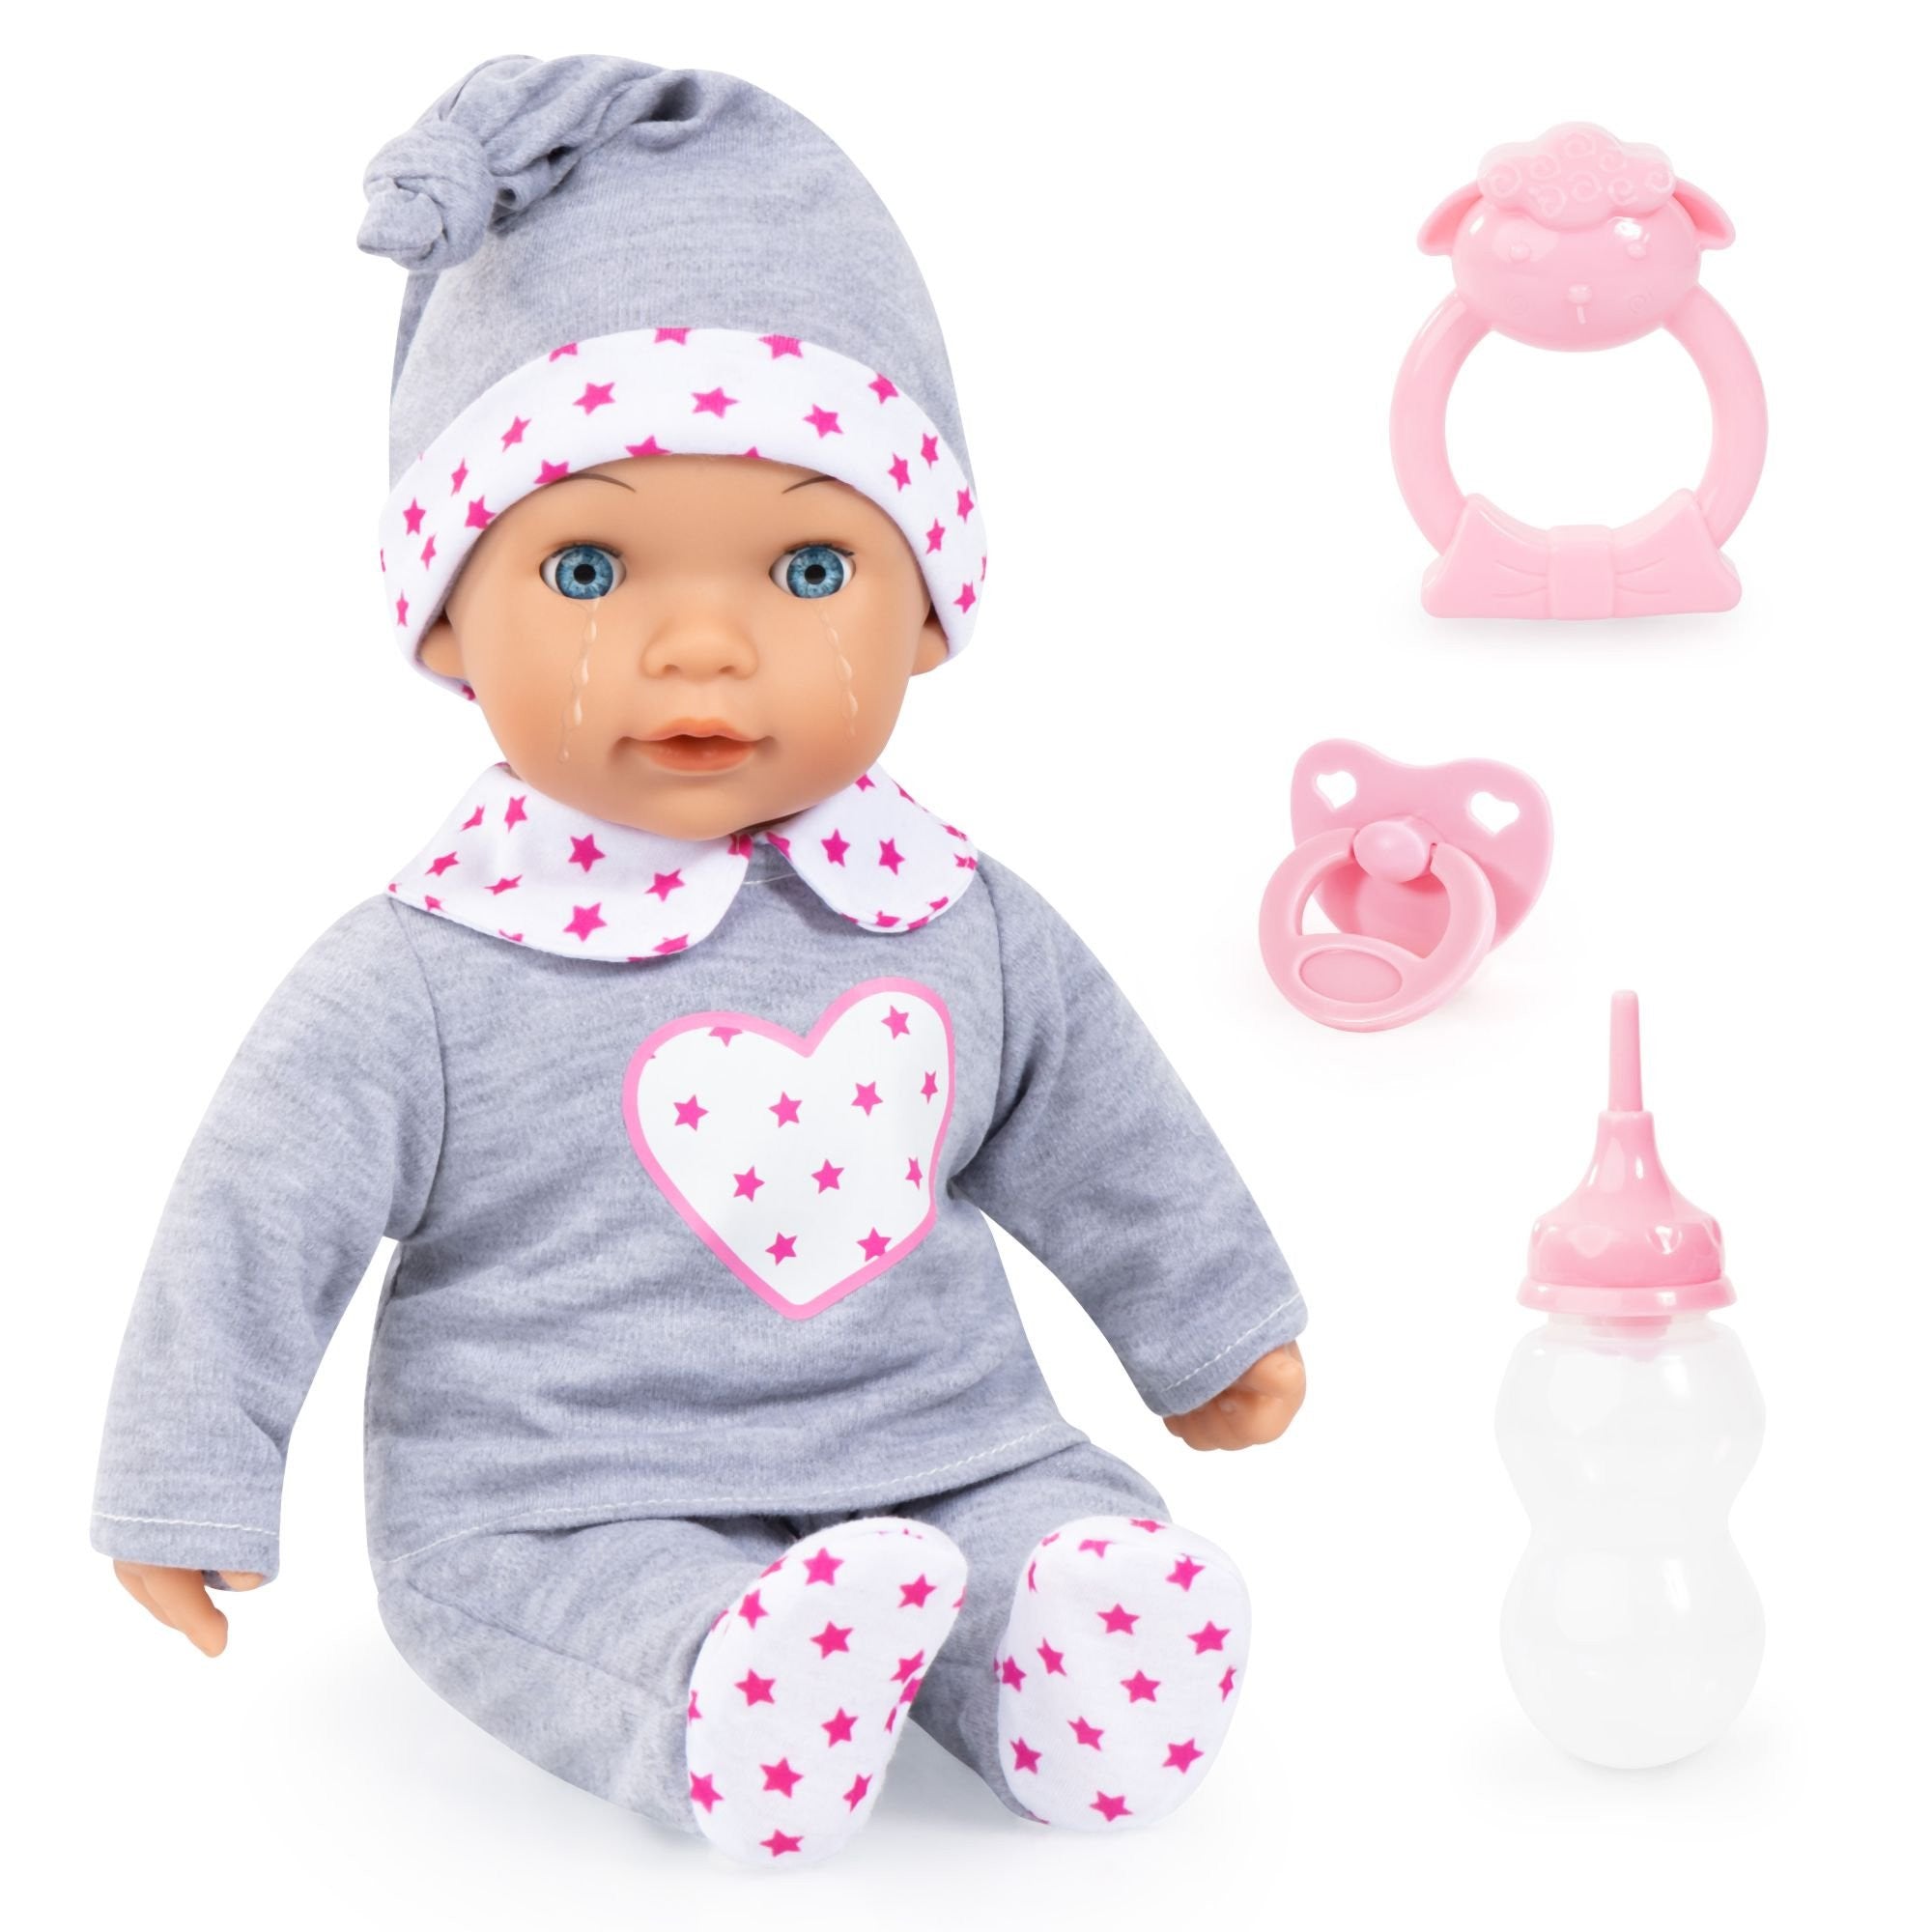 Tears Baby Doll - Heart With Accessories (38CM TALL)